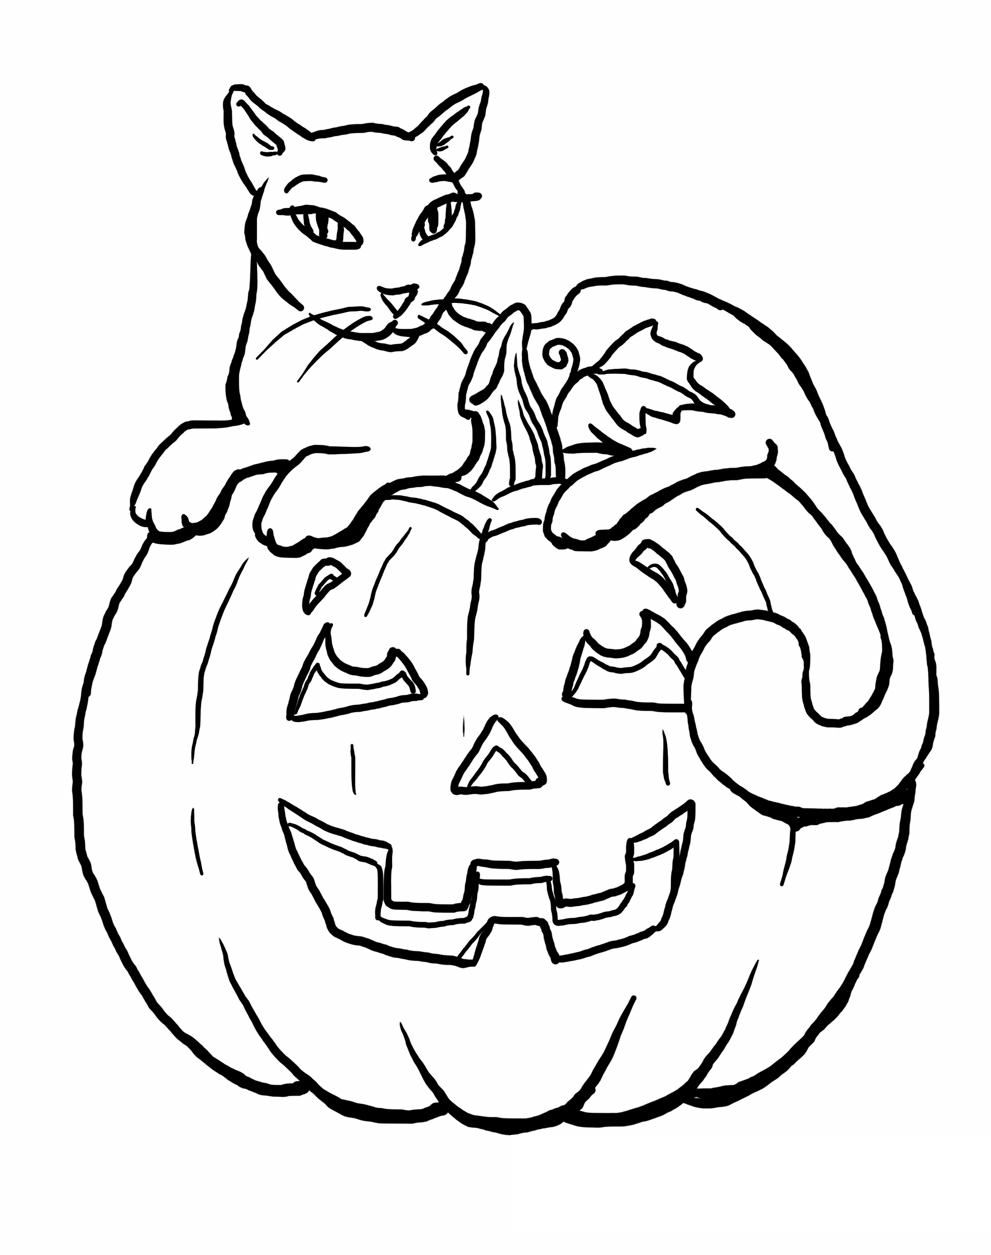 Kittens With N? Butterflies Free Coloring Pages - Coloring Home